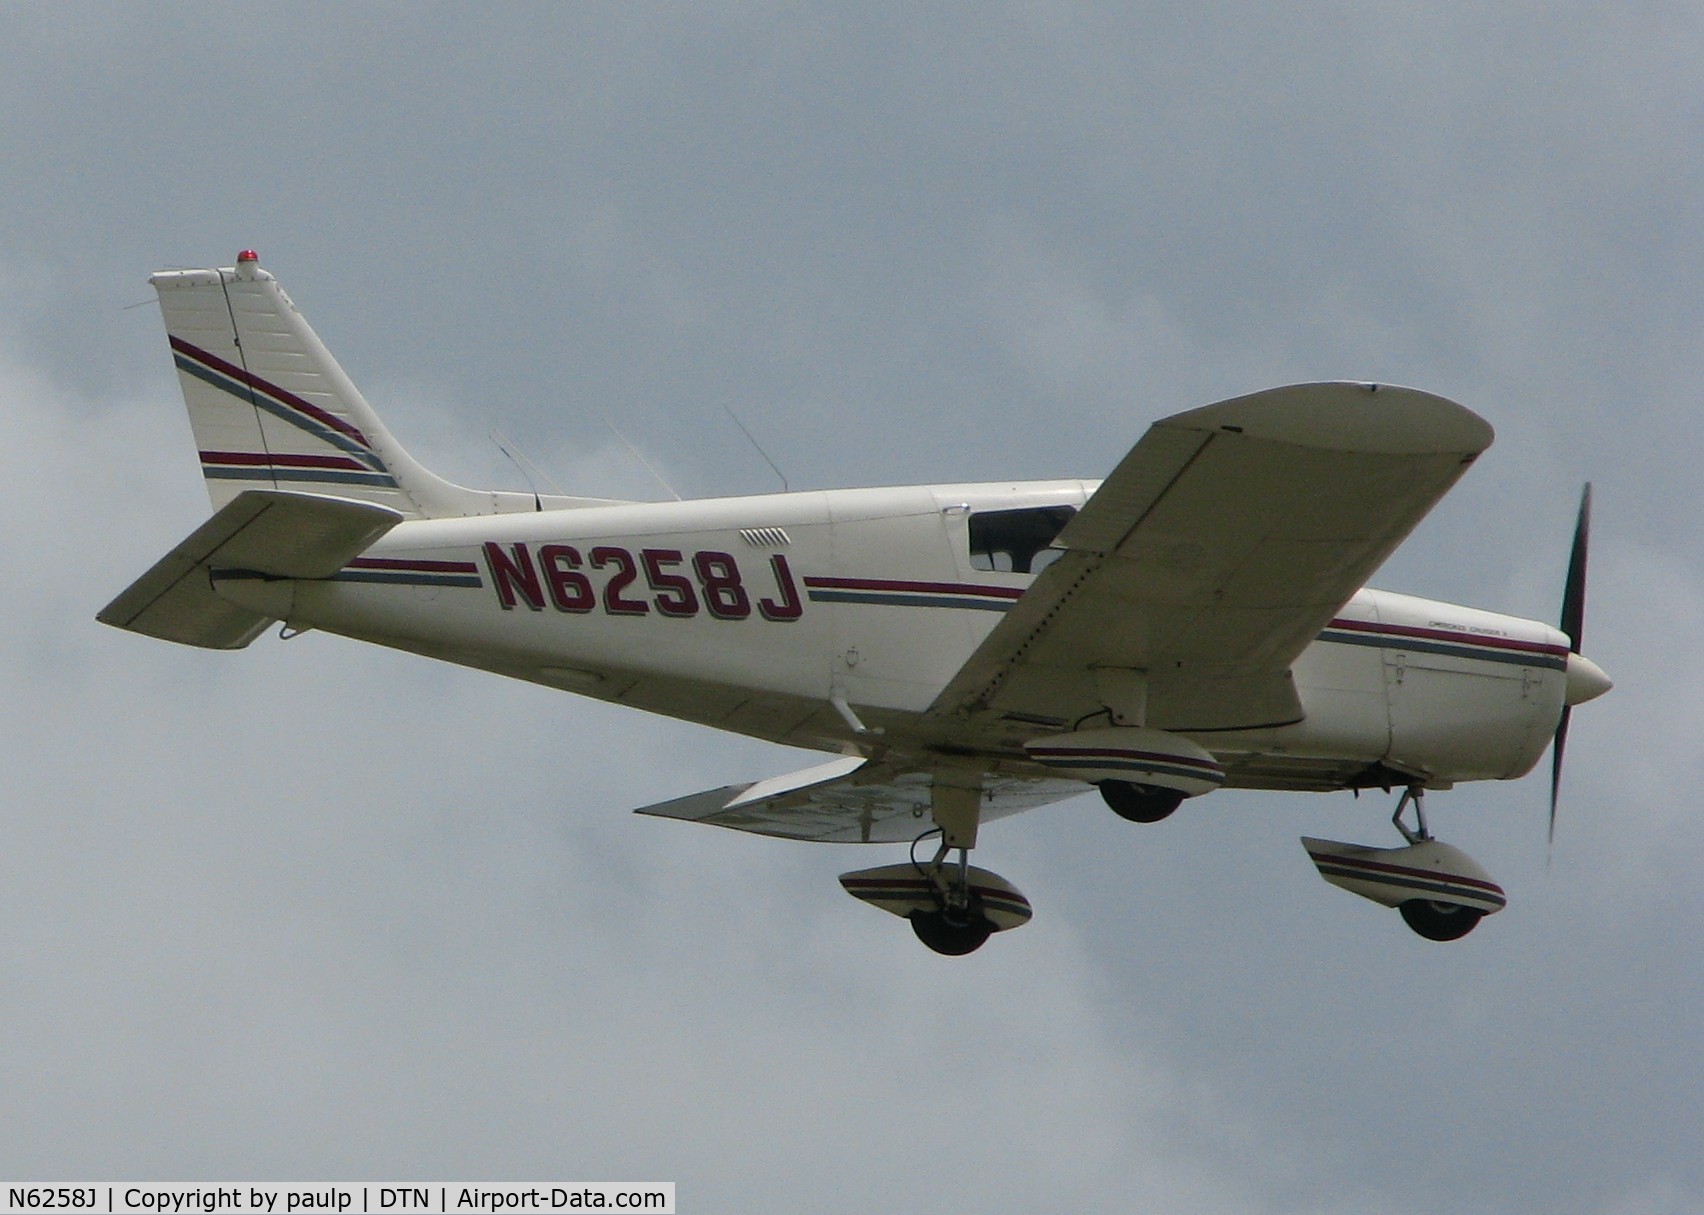 N6258J, 1976 Piper PA-28-140 C/N 28-7625236, Doing touch and goes at Downtown Shreveport.